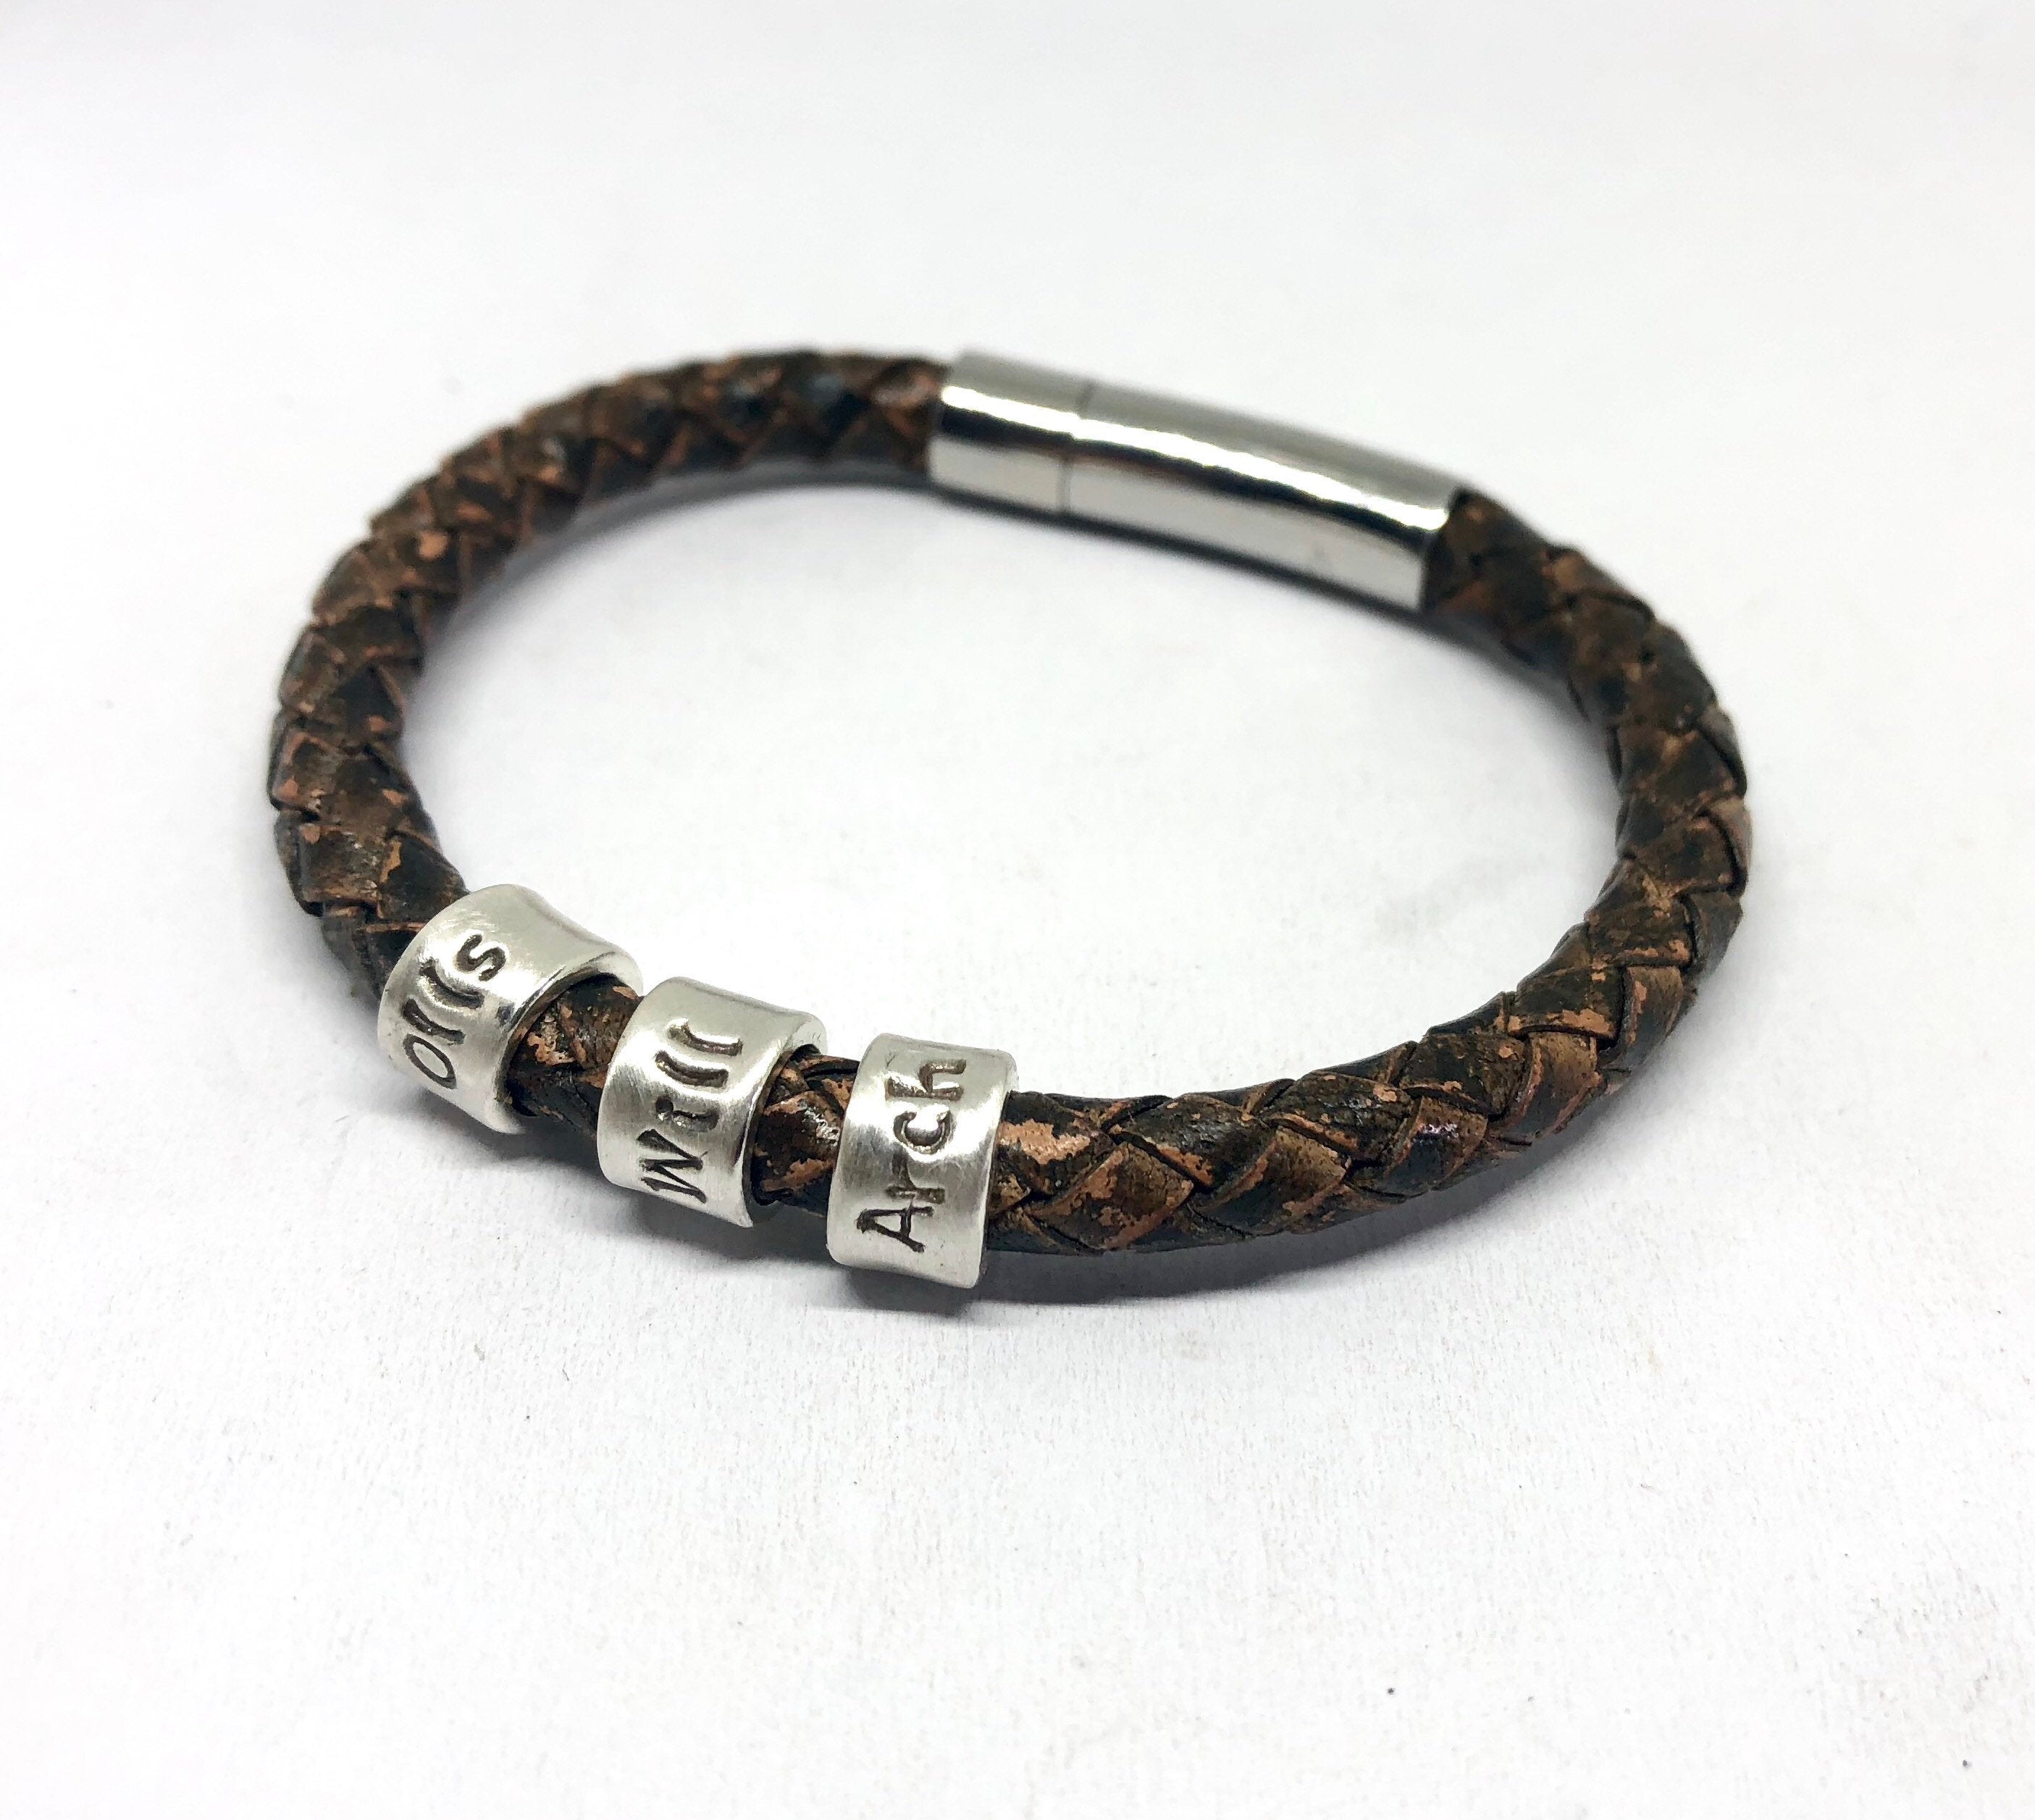 Vintage Spike Rock Leather Charm Bracelets Without Charms For Men Set Of 4  With Braided Wrap Wristband Rope And Beads Jewelry From Sodatx, $6.56 |  DHgate.Com